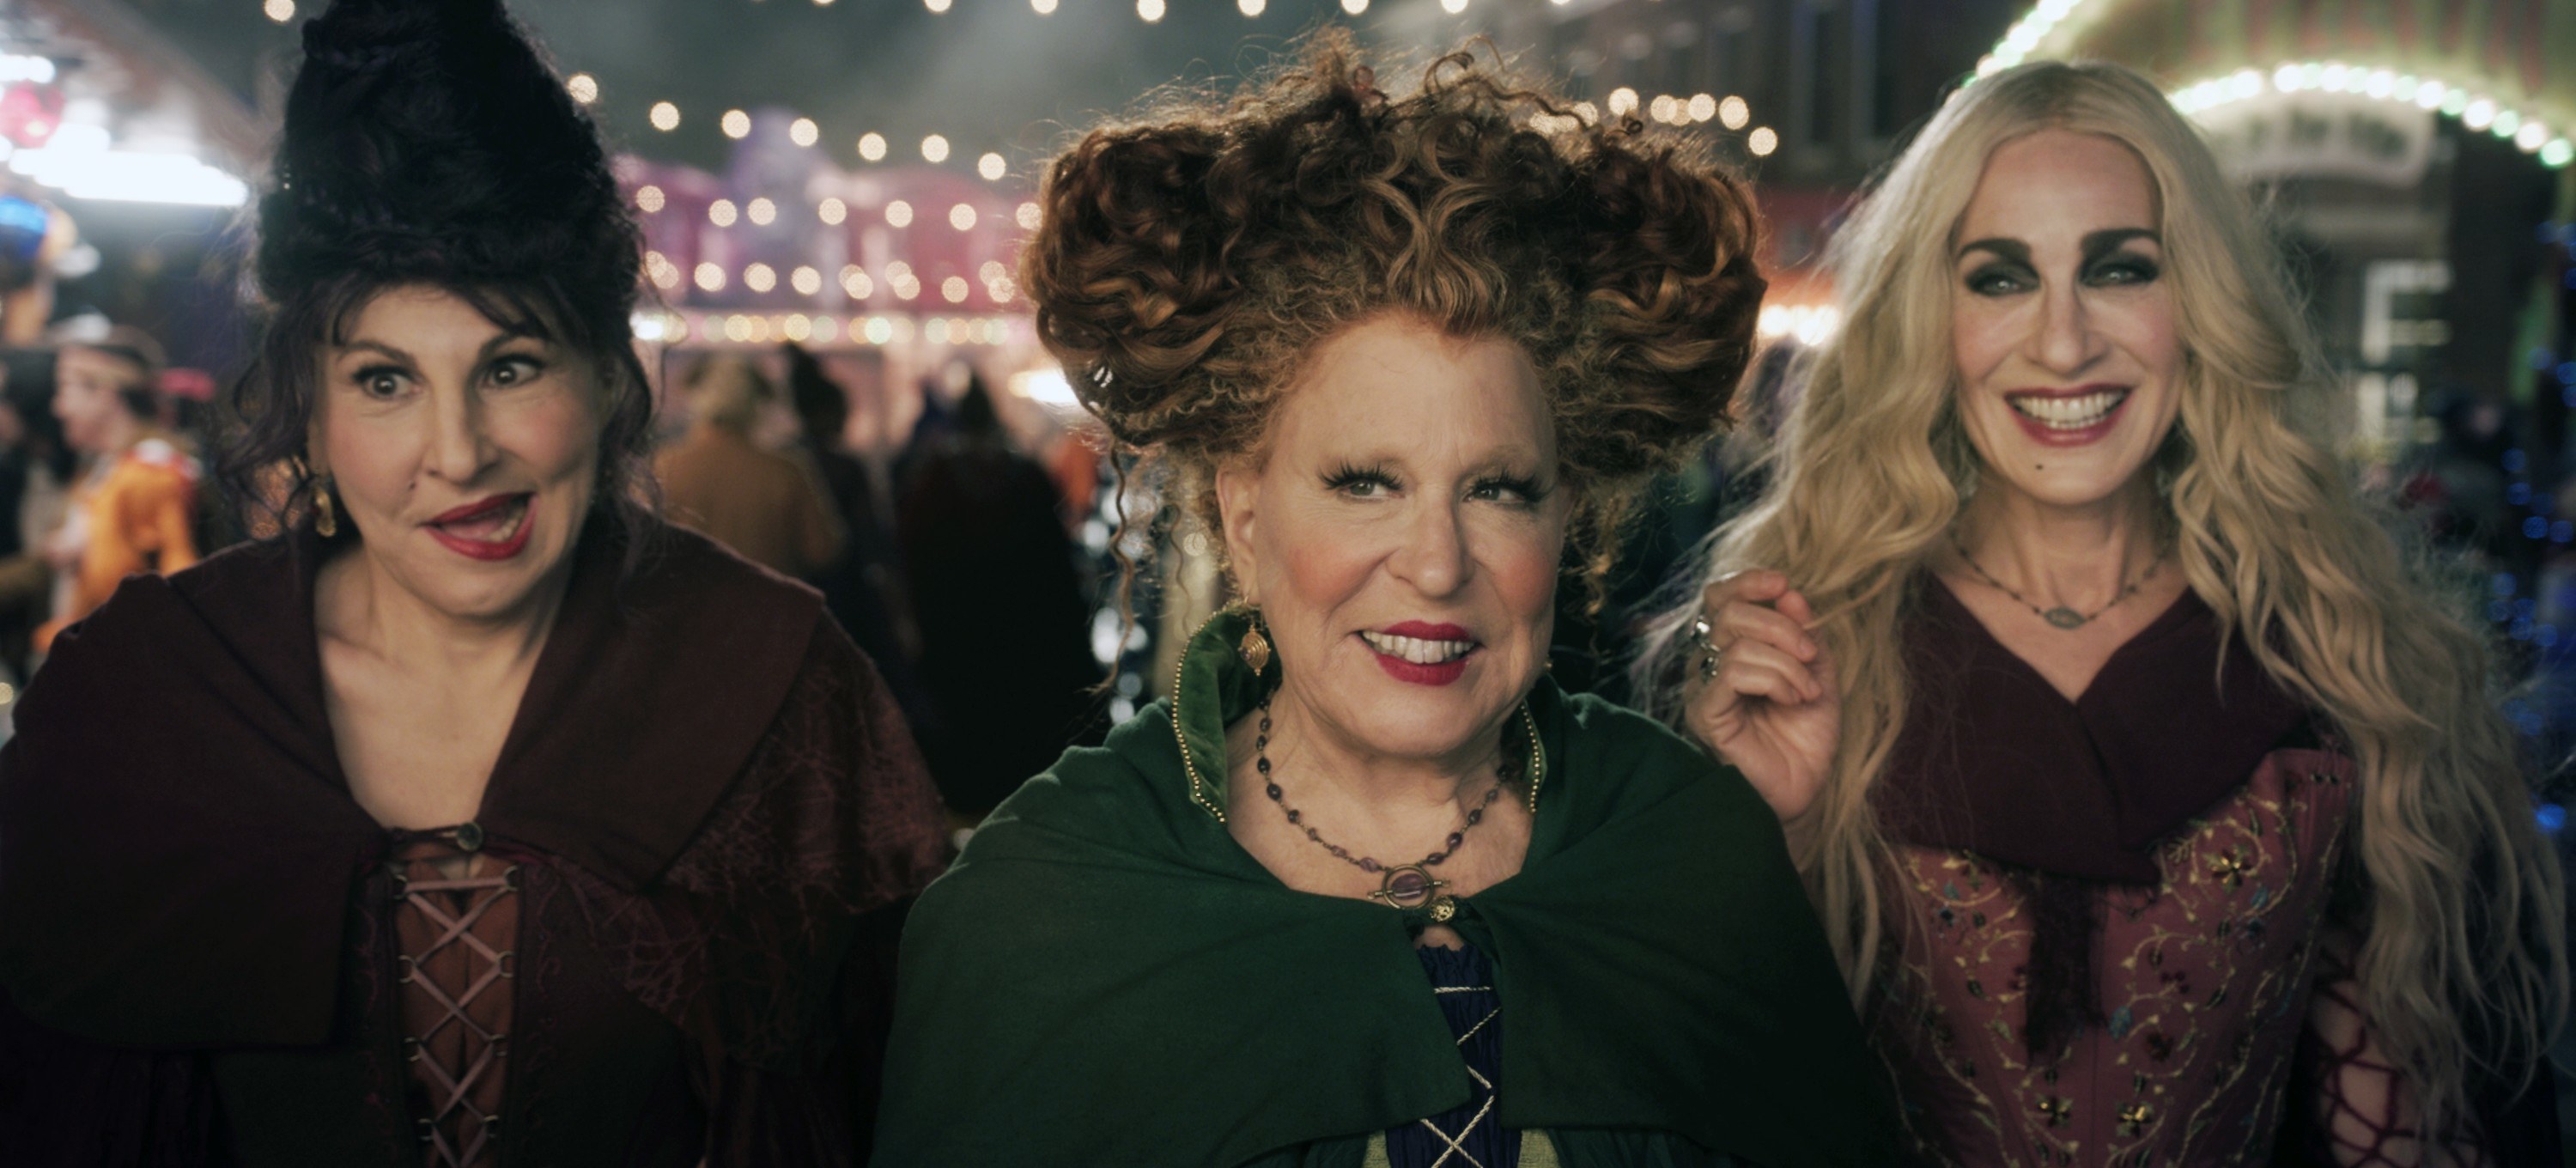 the Sanderson Sisters at a festival